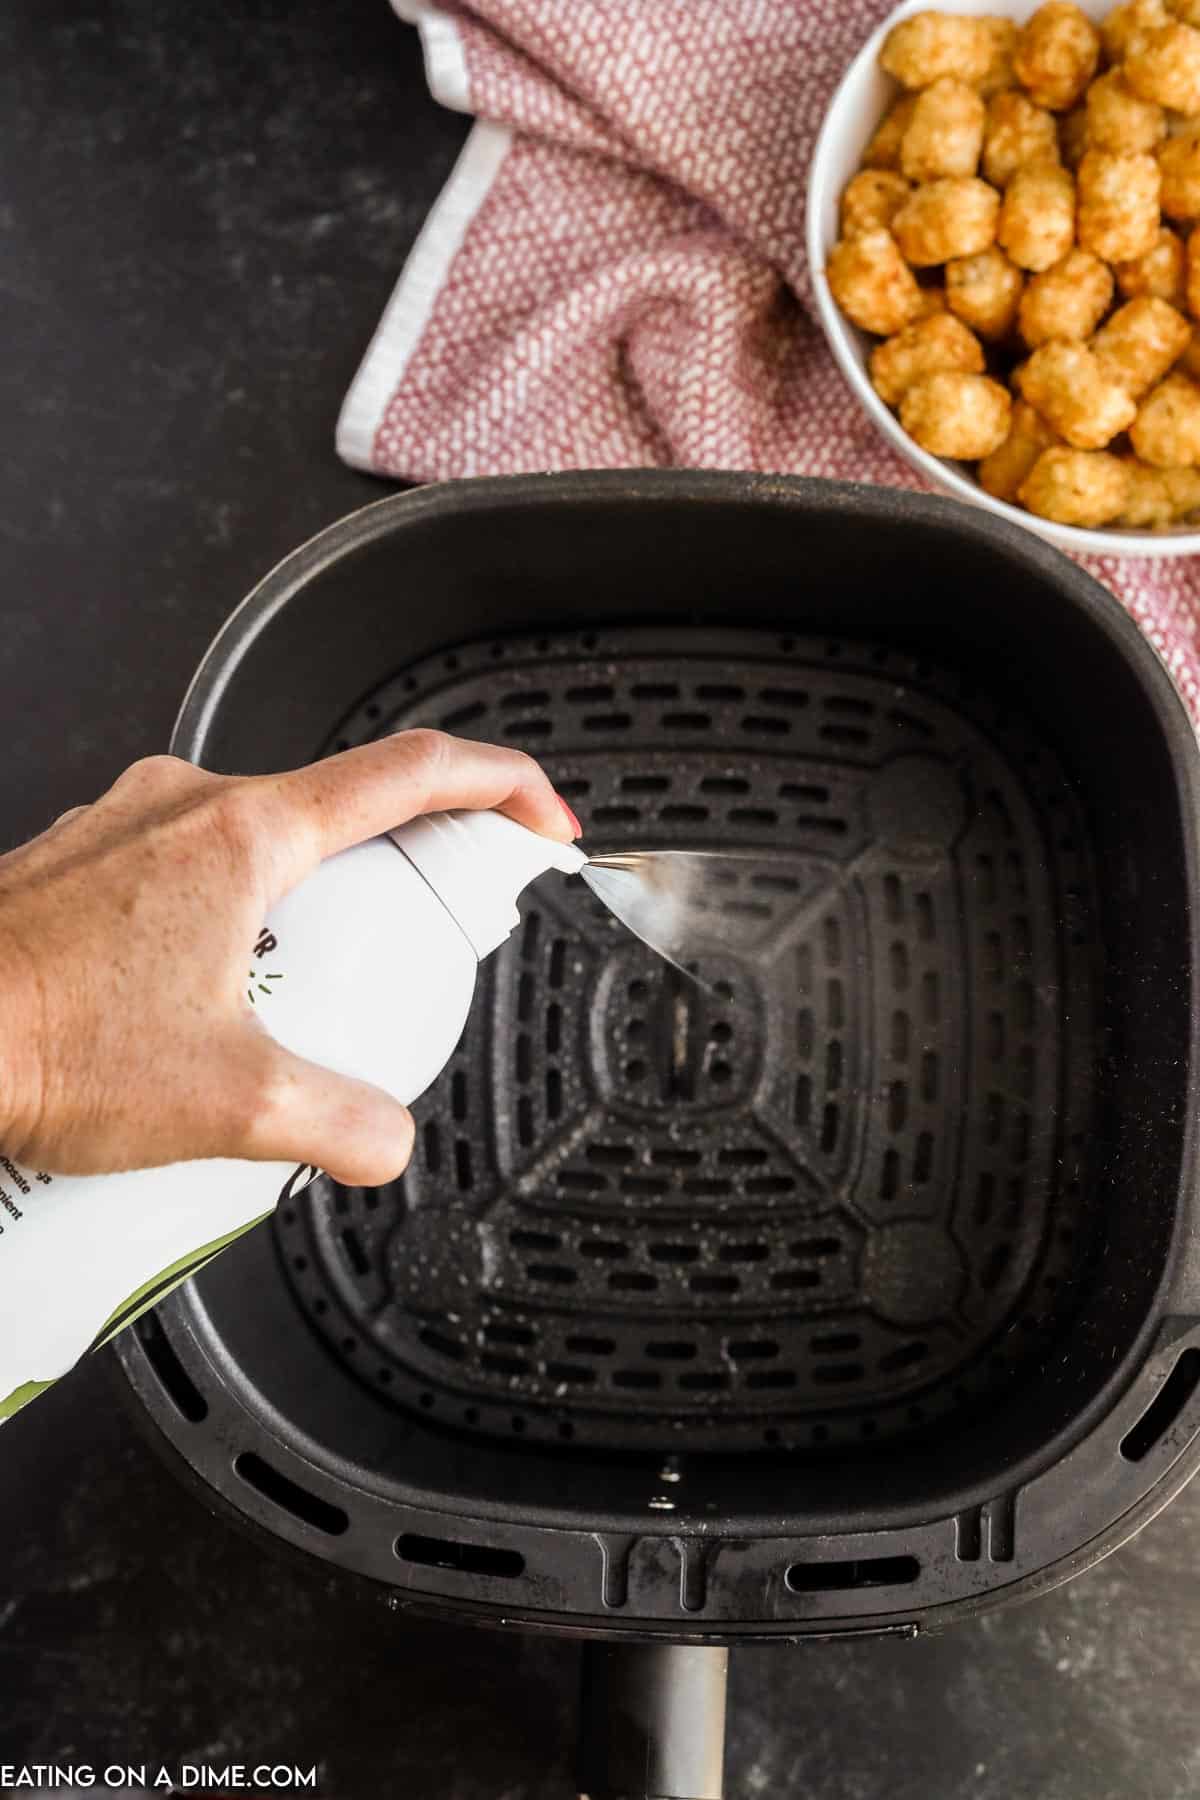 Spraying the air fryer basket with cooking spray